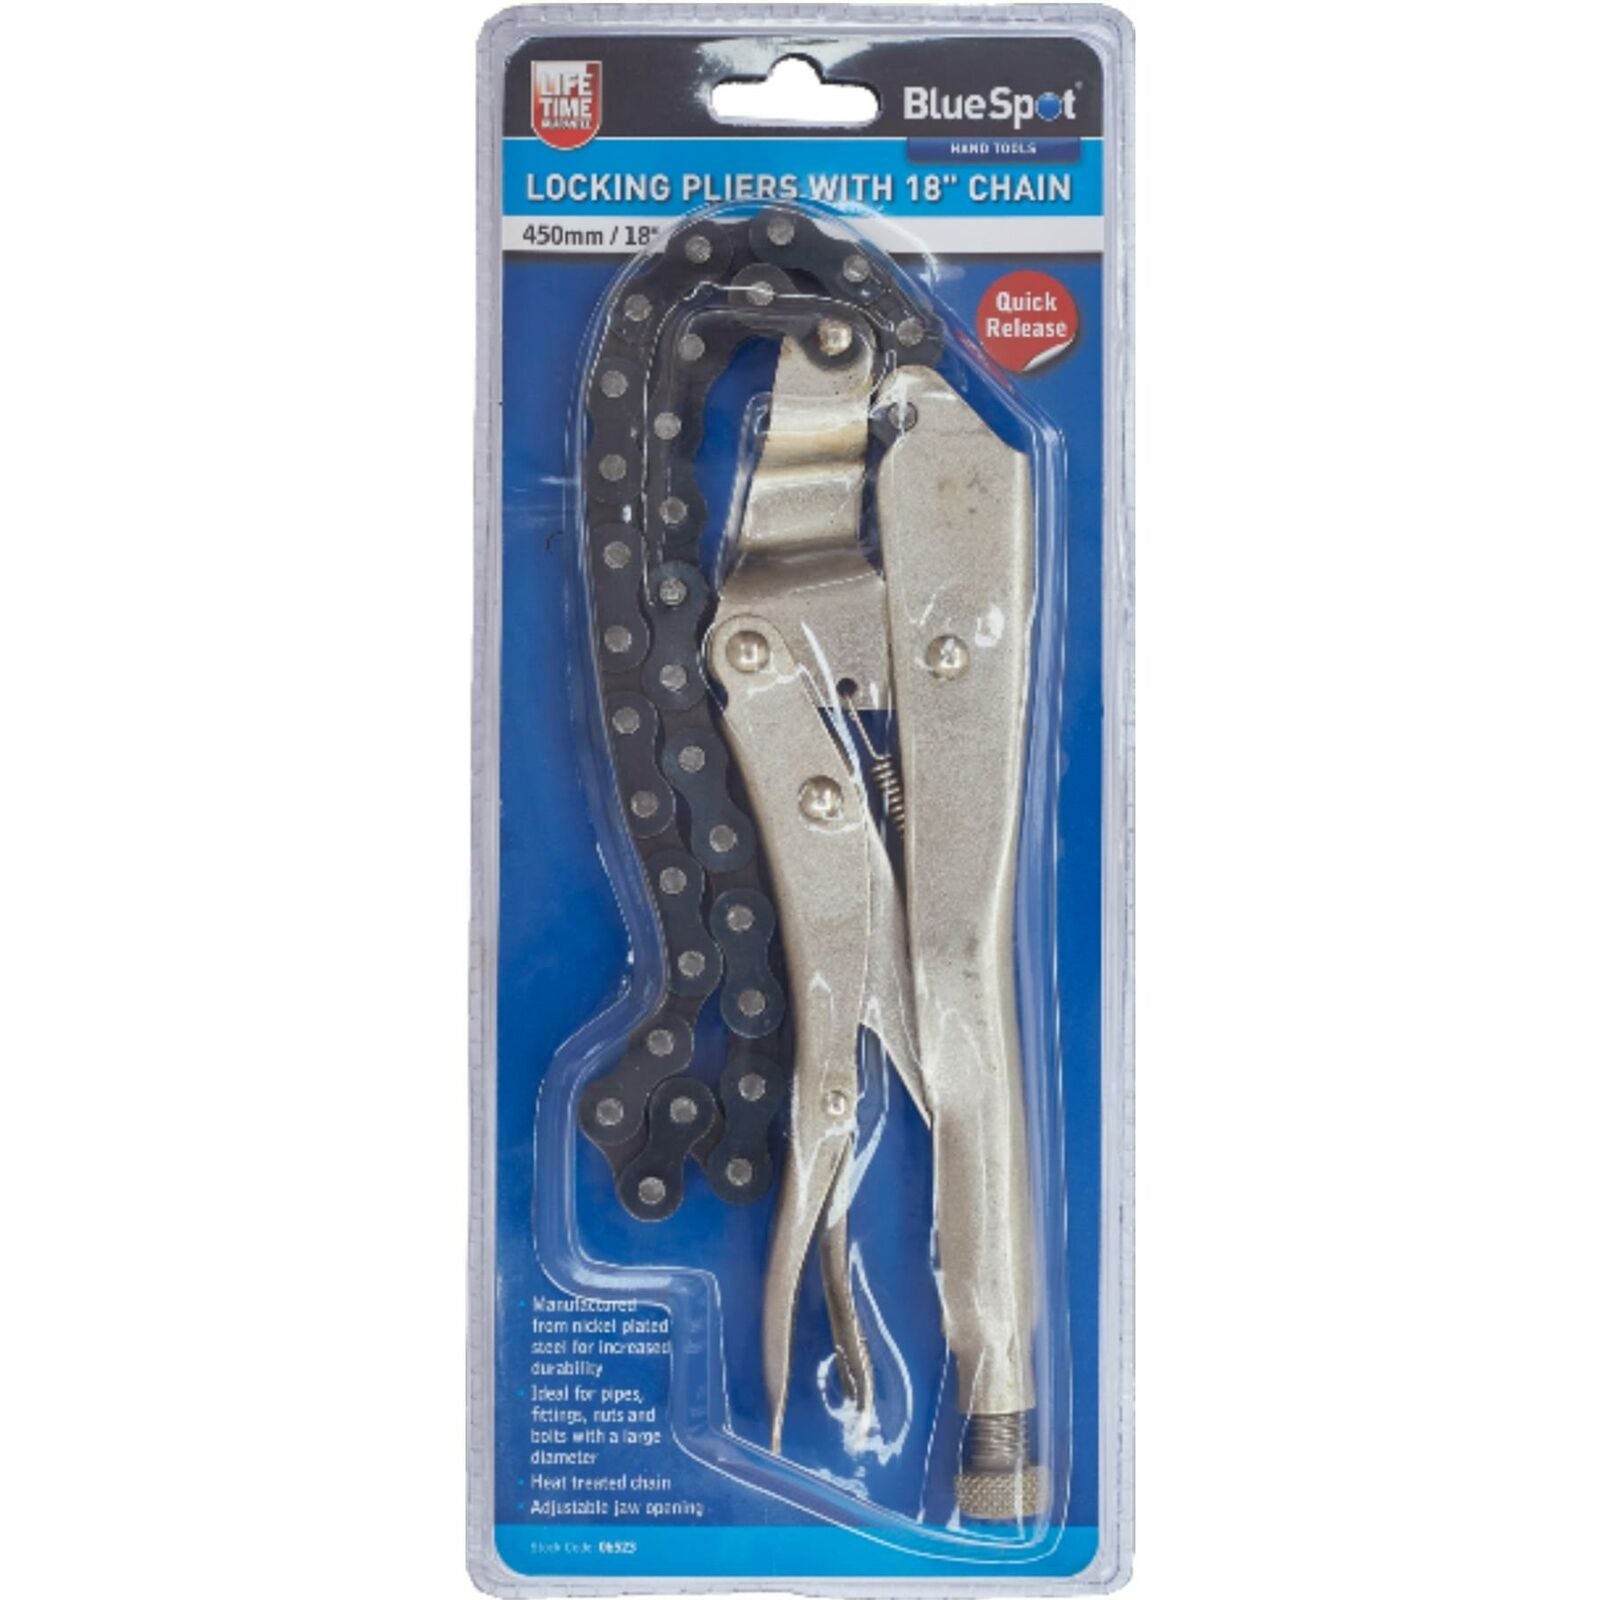 BlueSpot Adjustable Locking Mole Grip Chain Wrench Pliers Pipe Oil Filter Tool